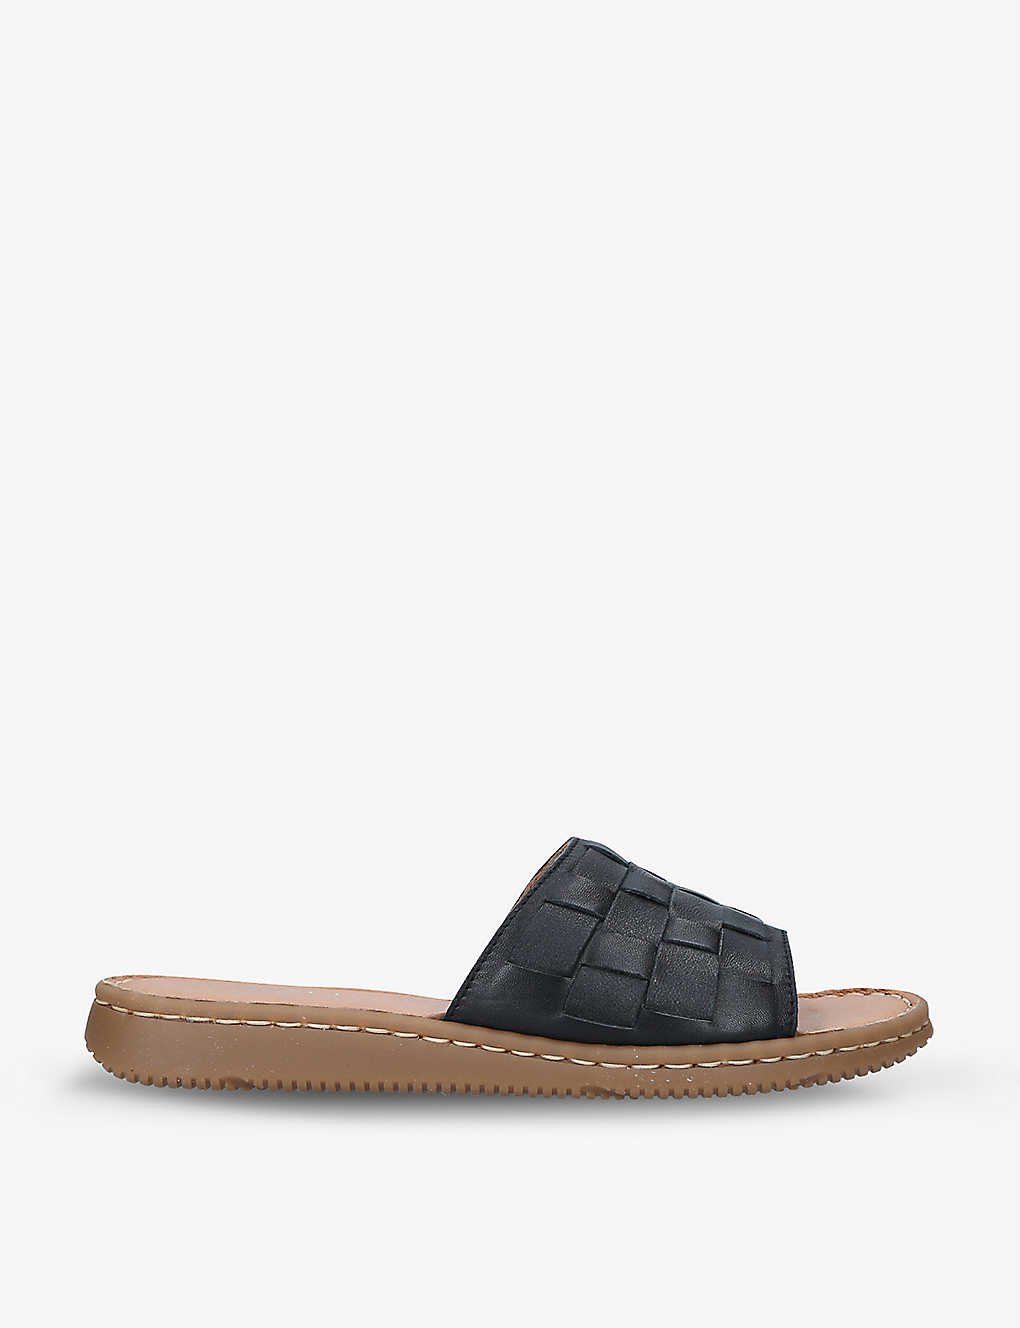 CARVELA COMFORT Sasha woven leather sandals All the people - great ...